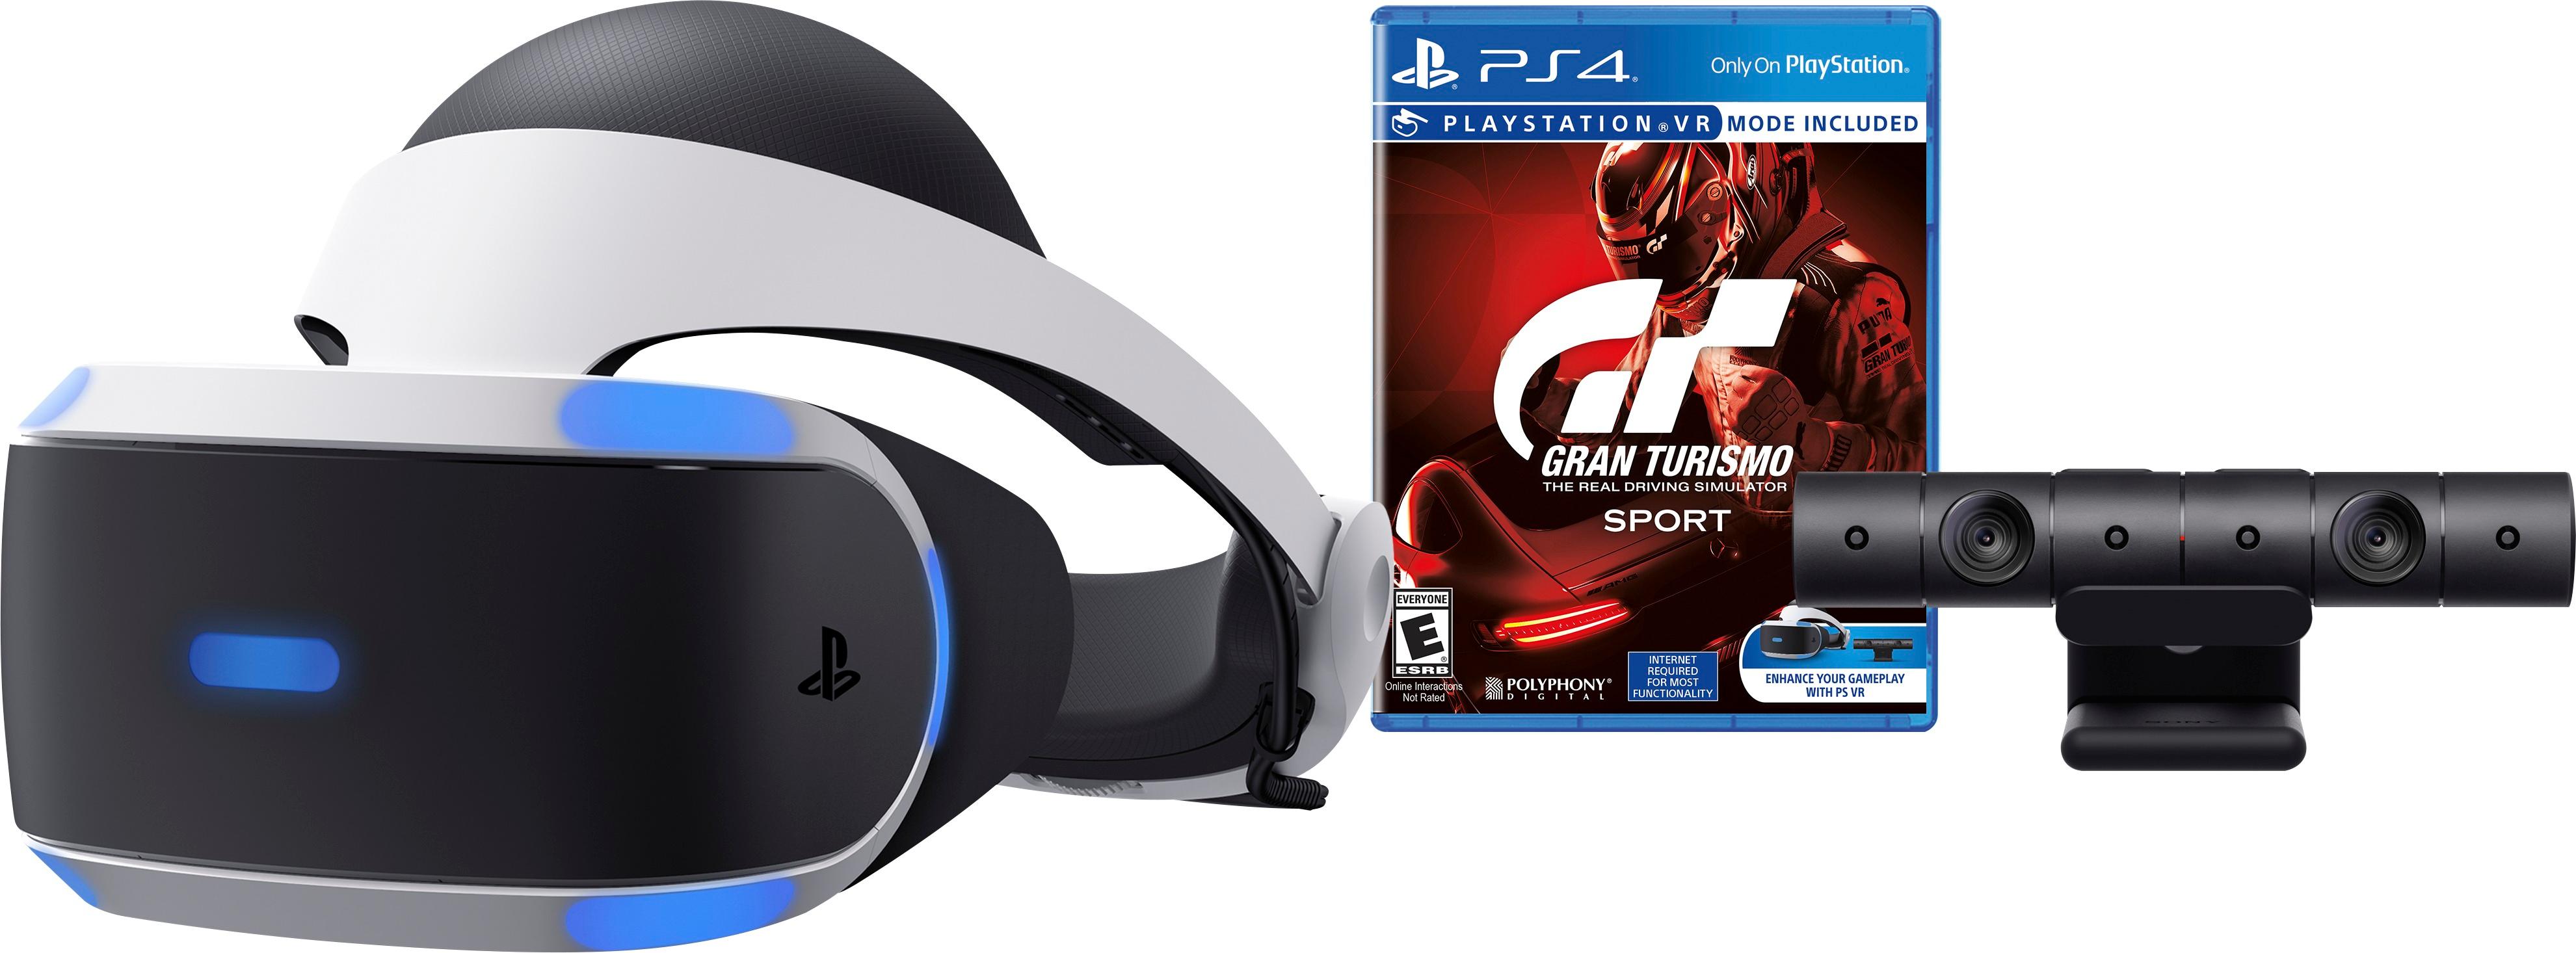 gran turismo ps4 vr review